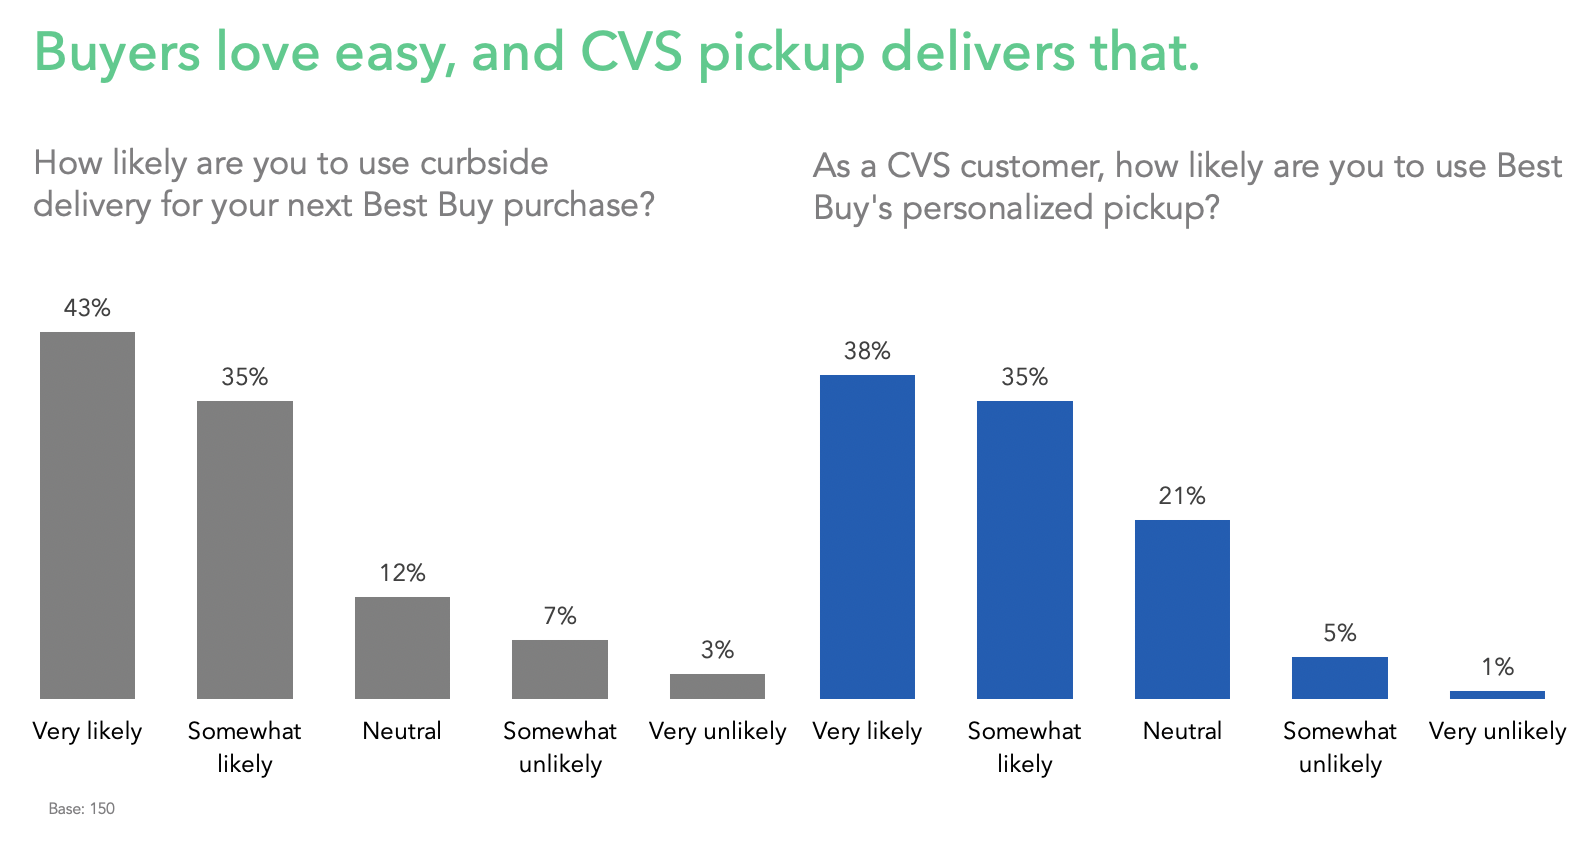 43% of consumers say they are very likely to use curbside delivery for their next Best Buy purchase.